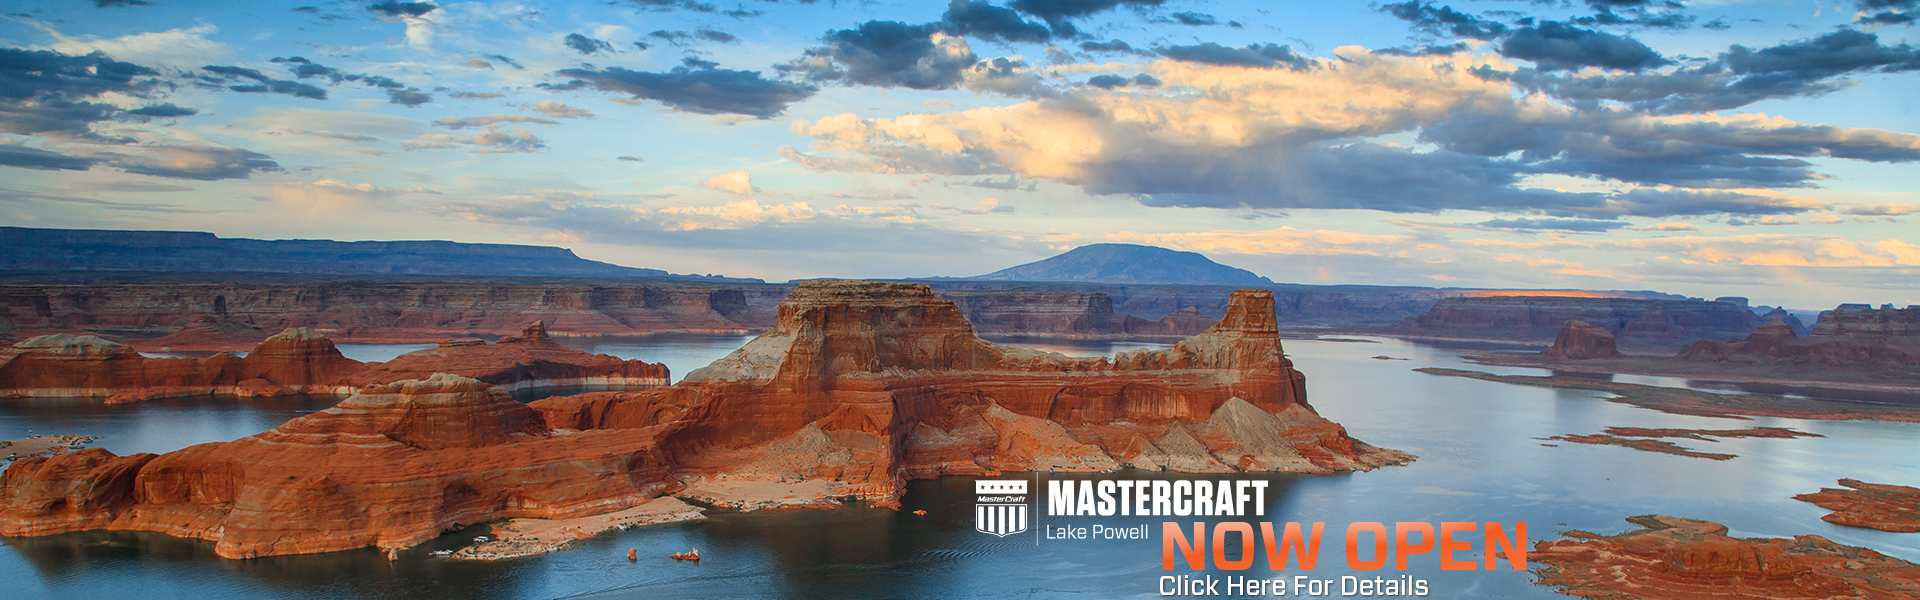 Have you ever thought of boating at Lake Powell?